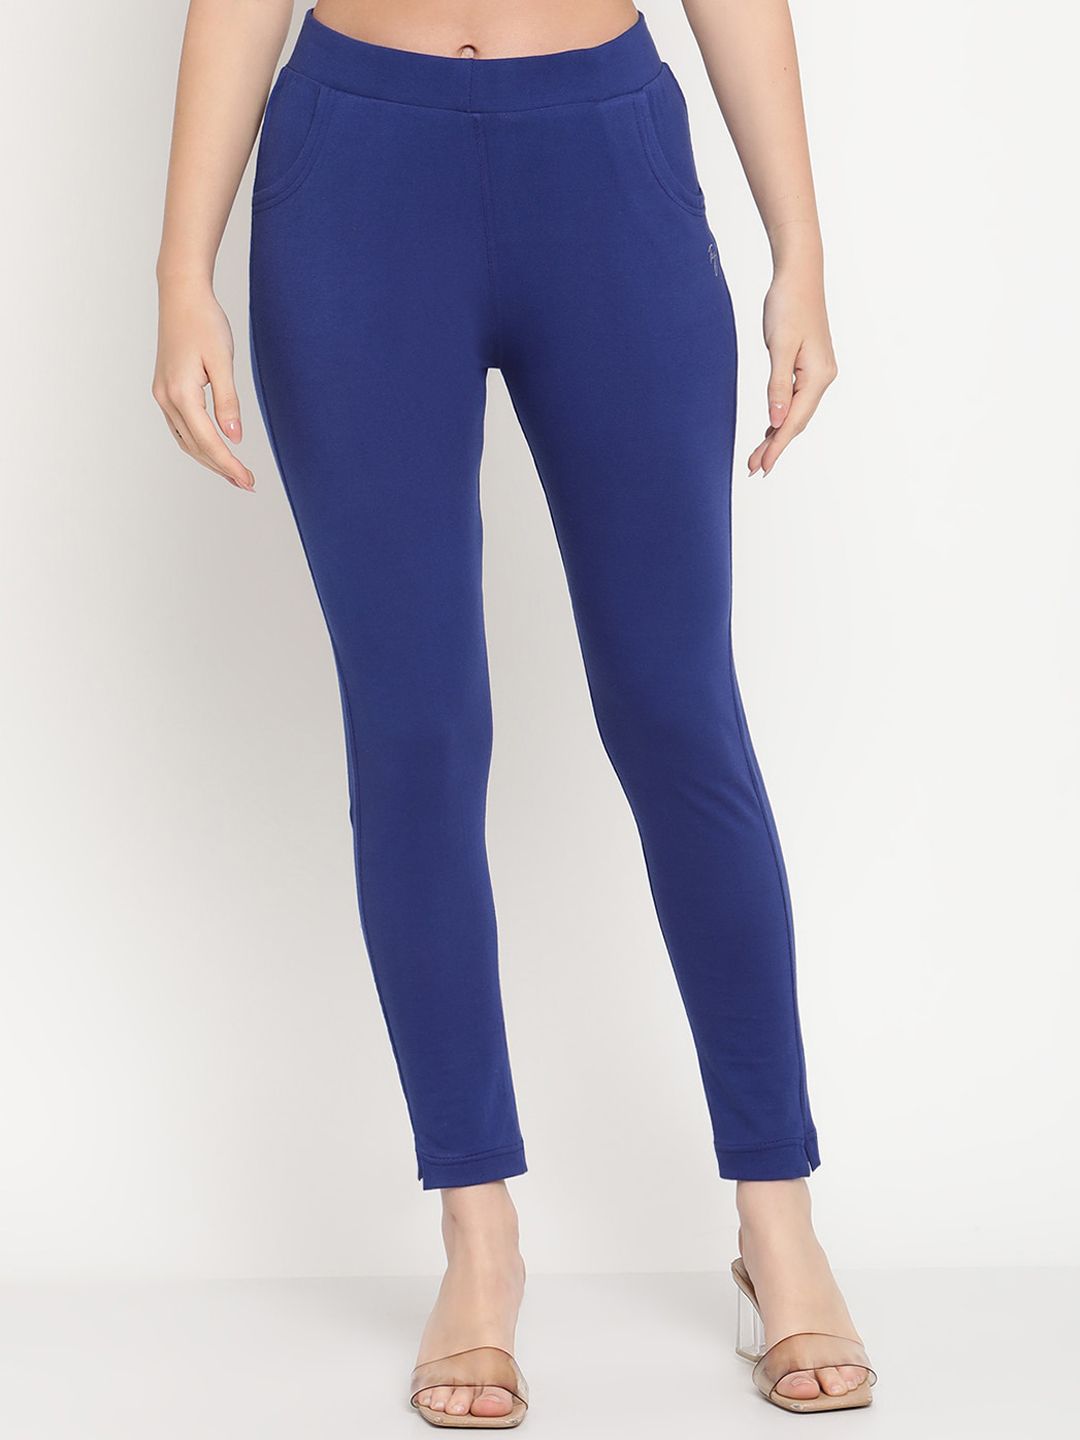 TAG 7 Women Blue Solid Ankle-Length Leggings Price in India